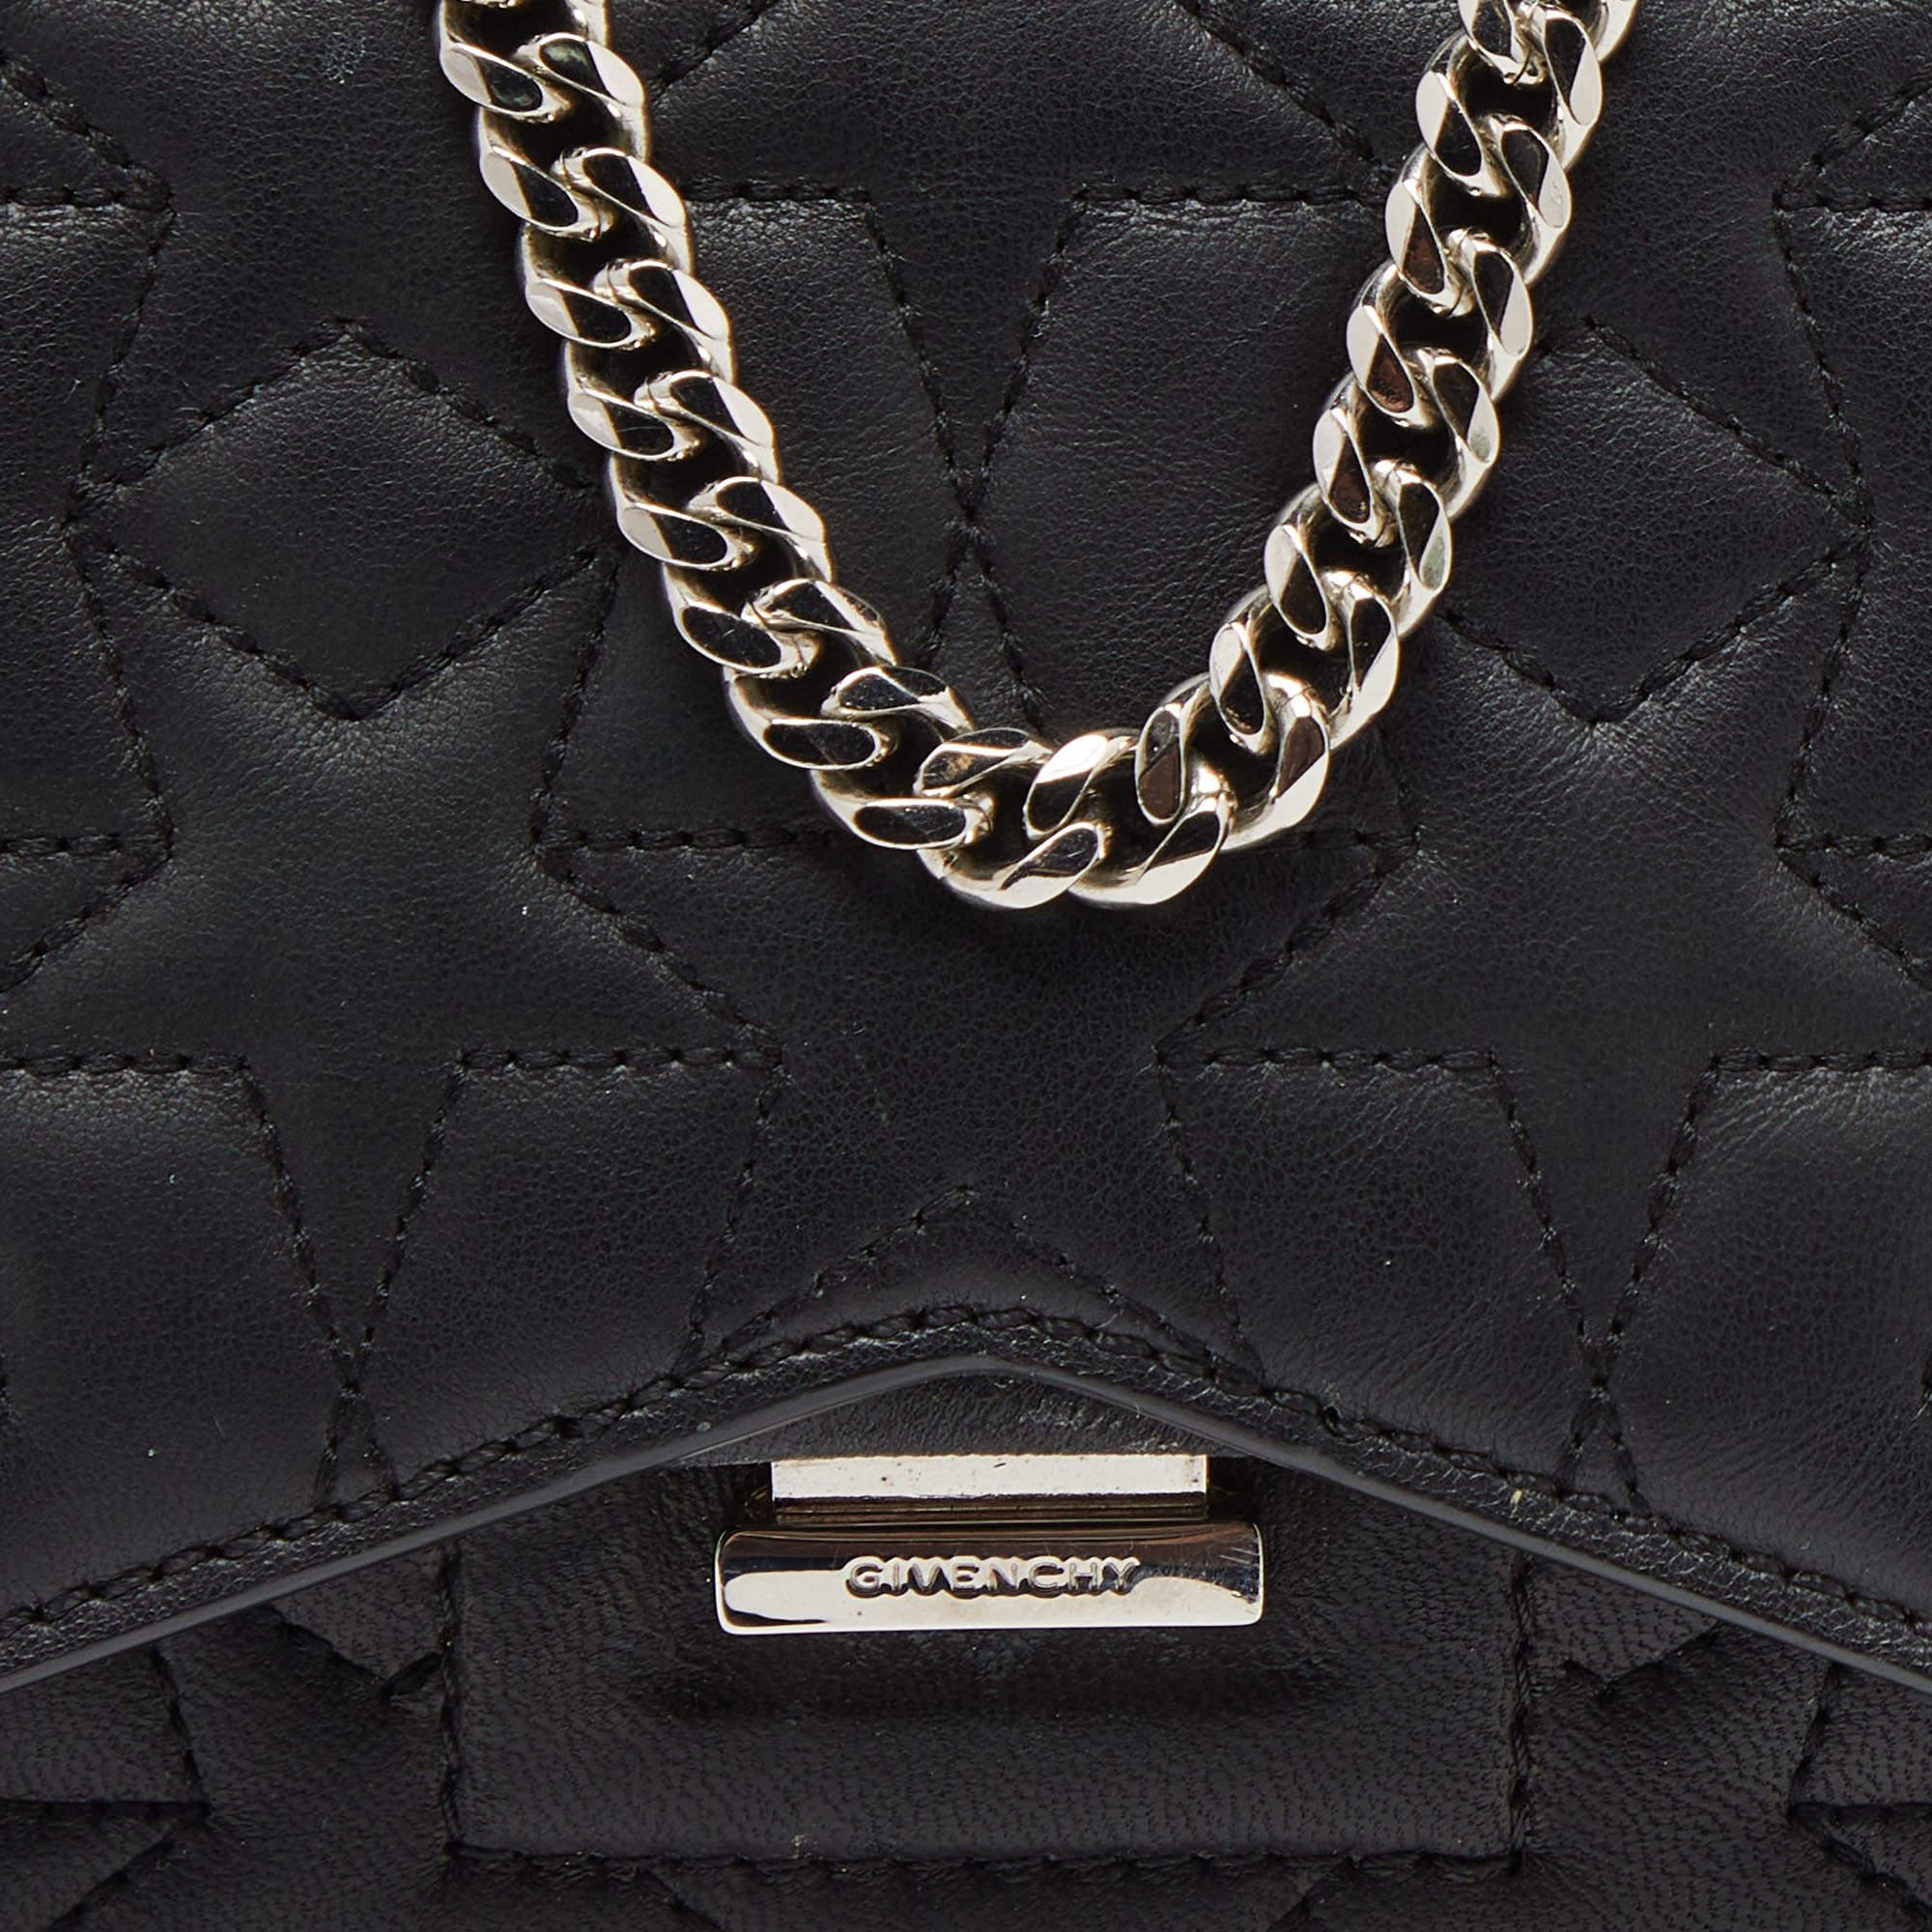 Women's Givenchy Black Leather Bow Cut Flap Chain Bag